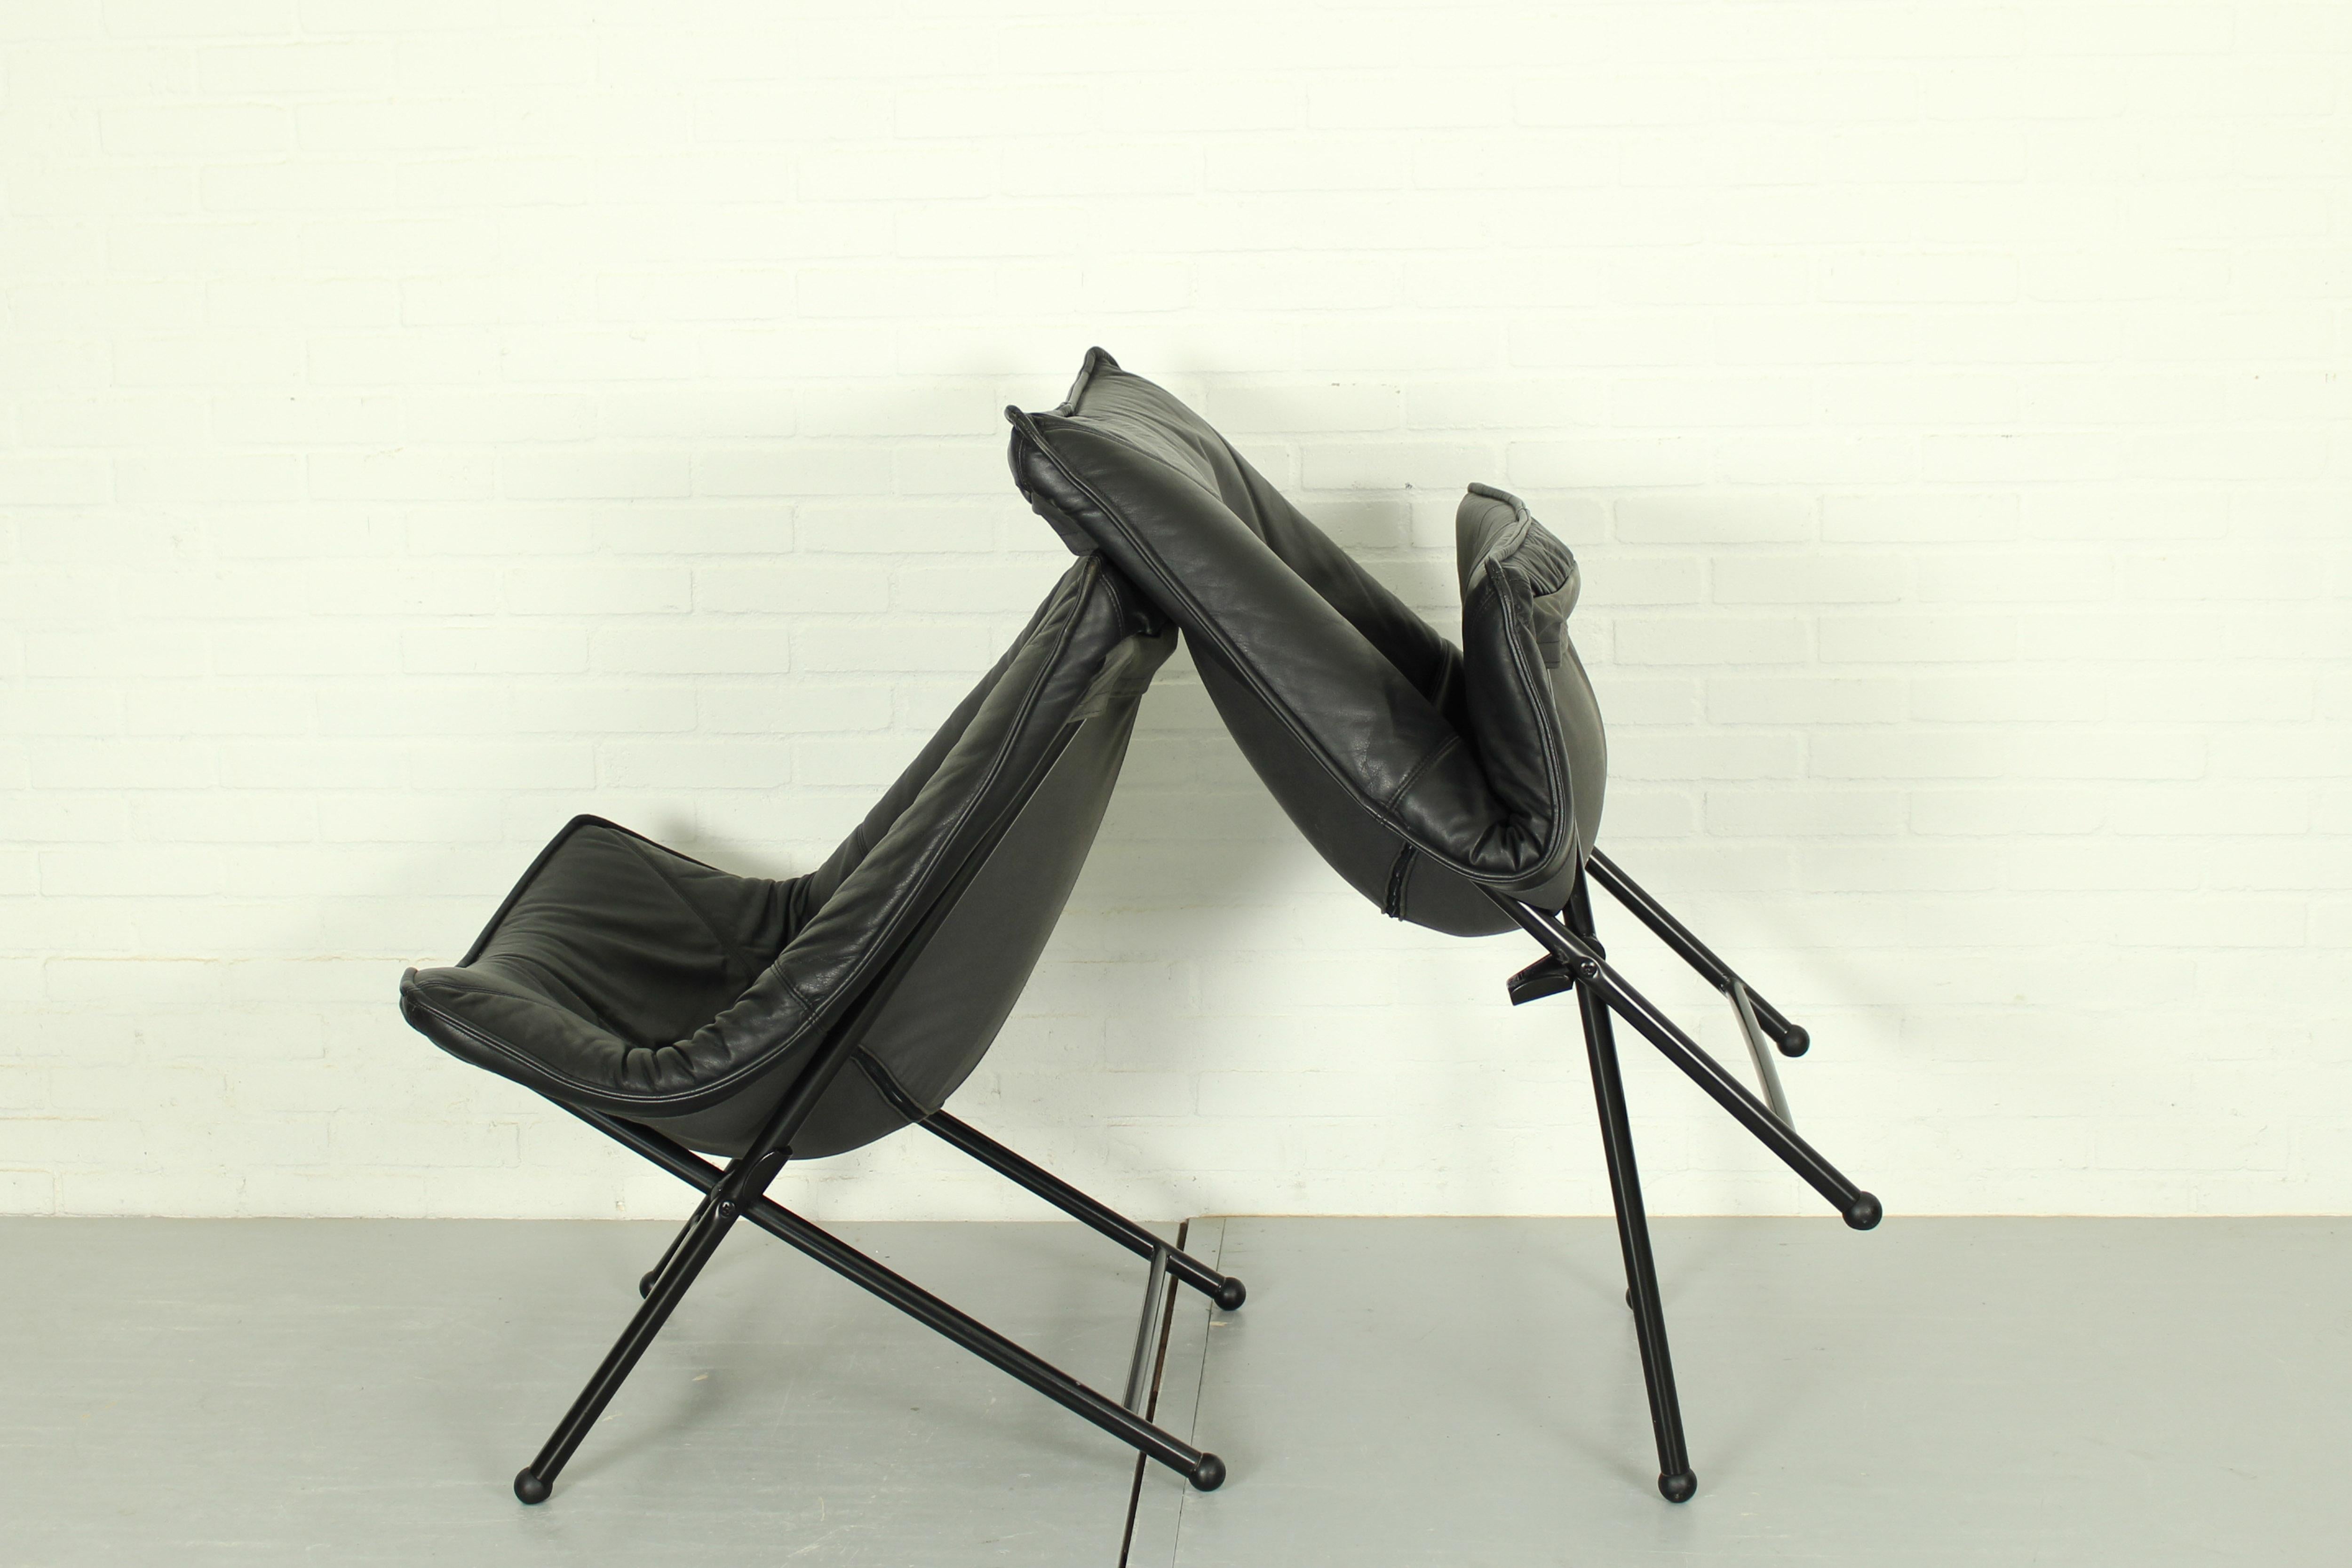 Folding Lounge Chairs in Black Leather by Teun Van Zanten for Molinari, 1970s For Sale 4